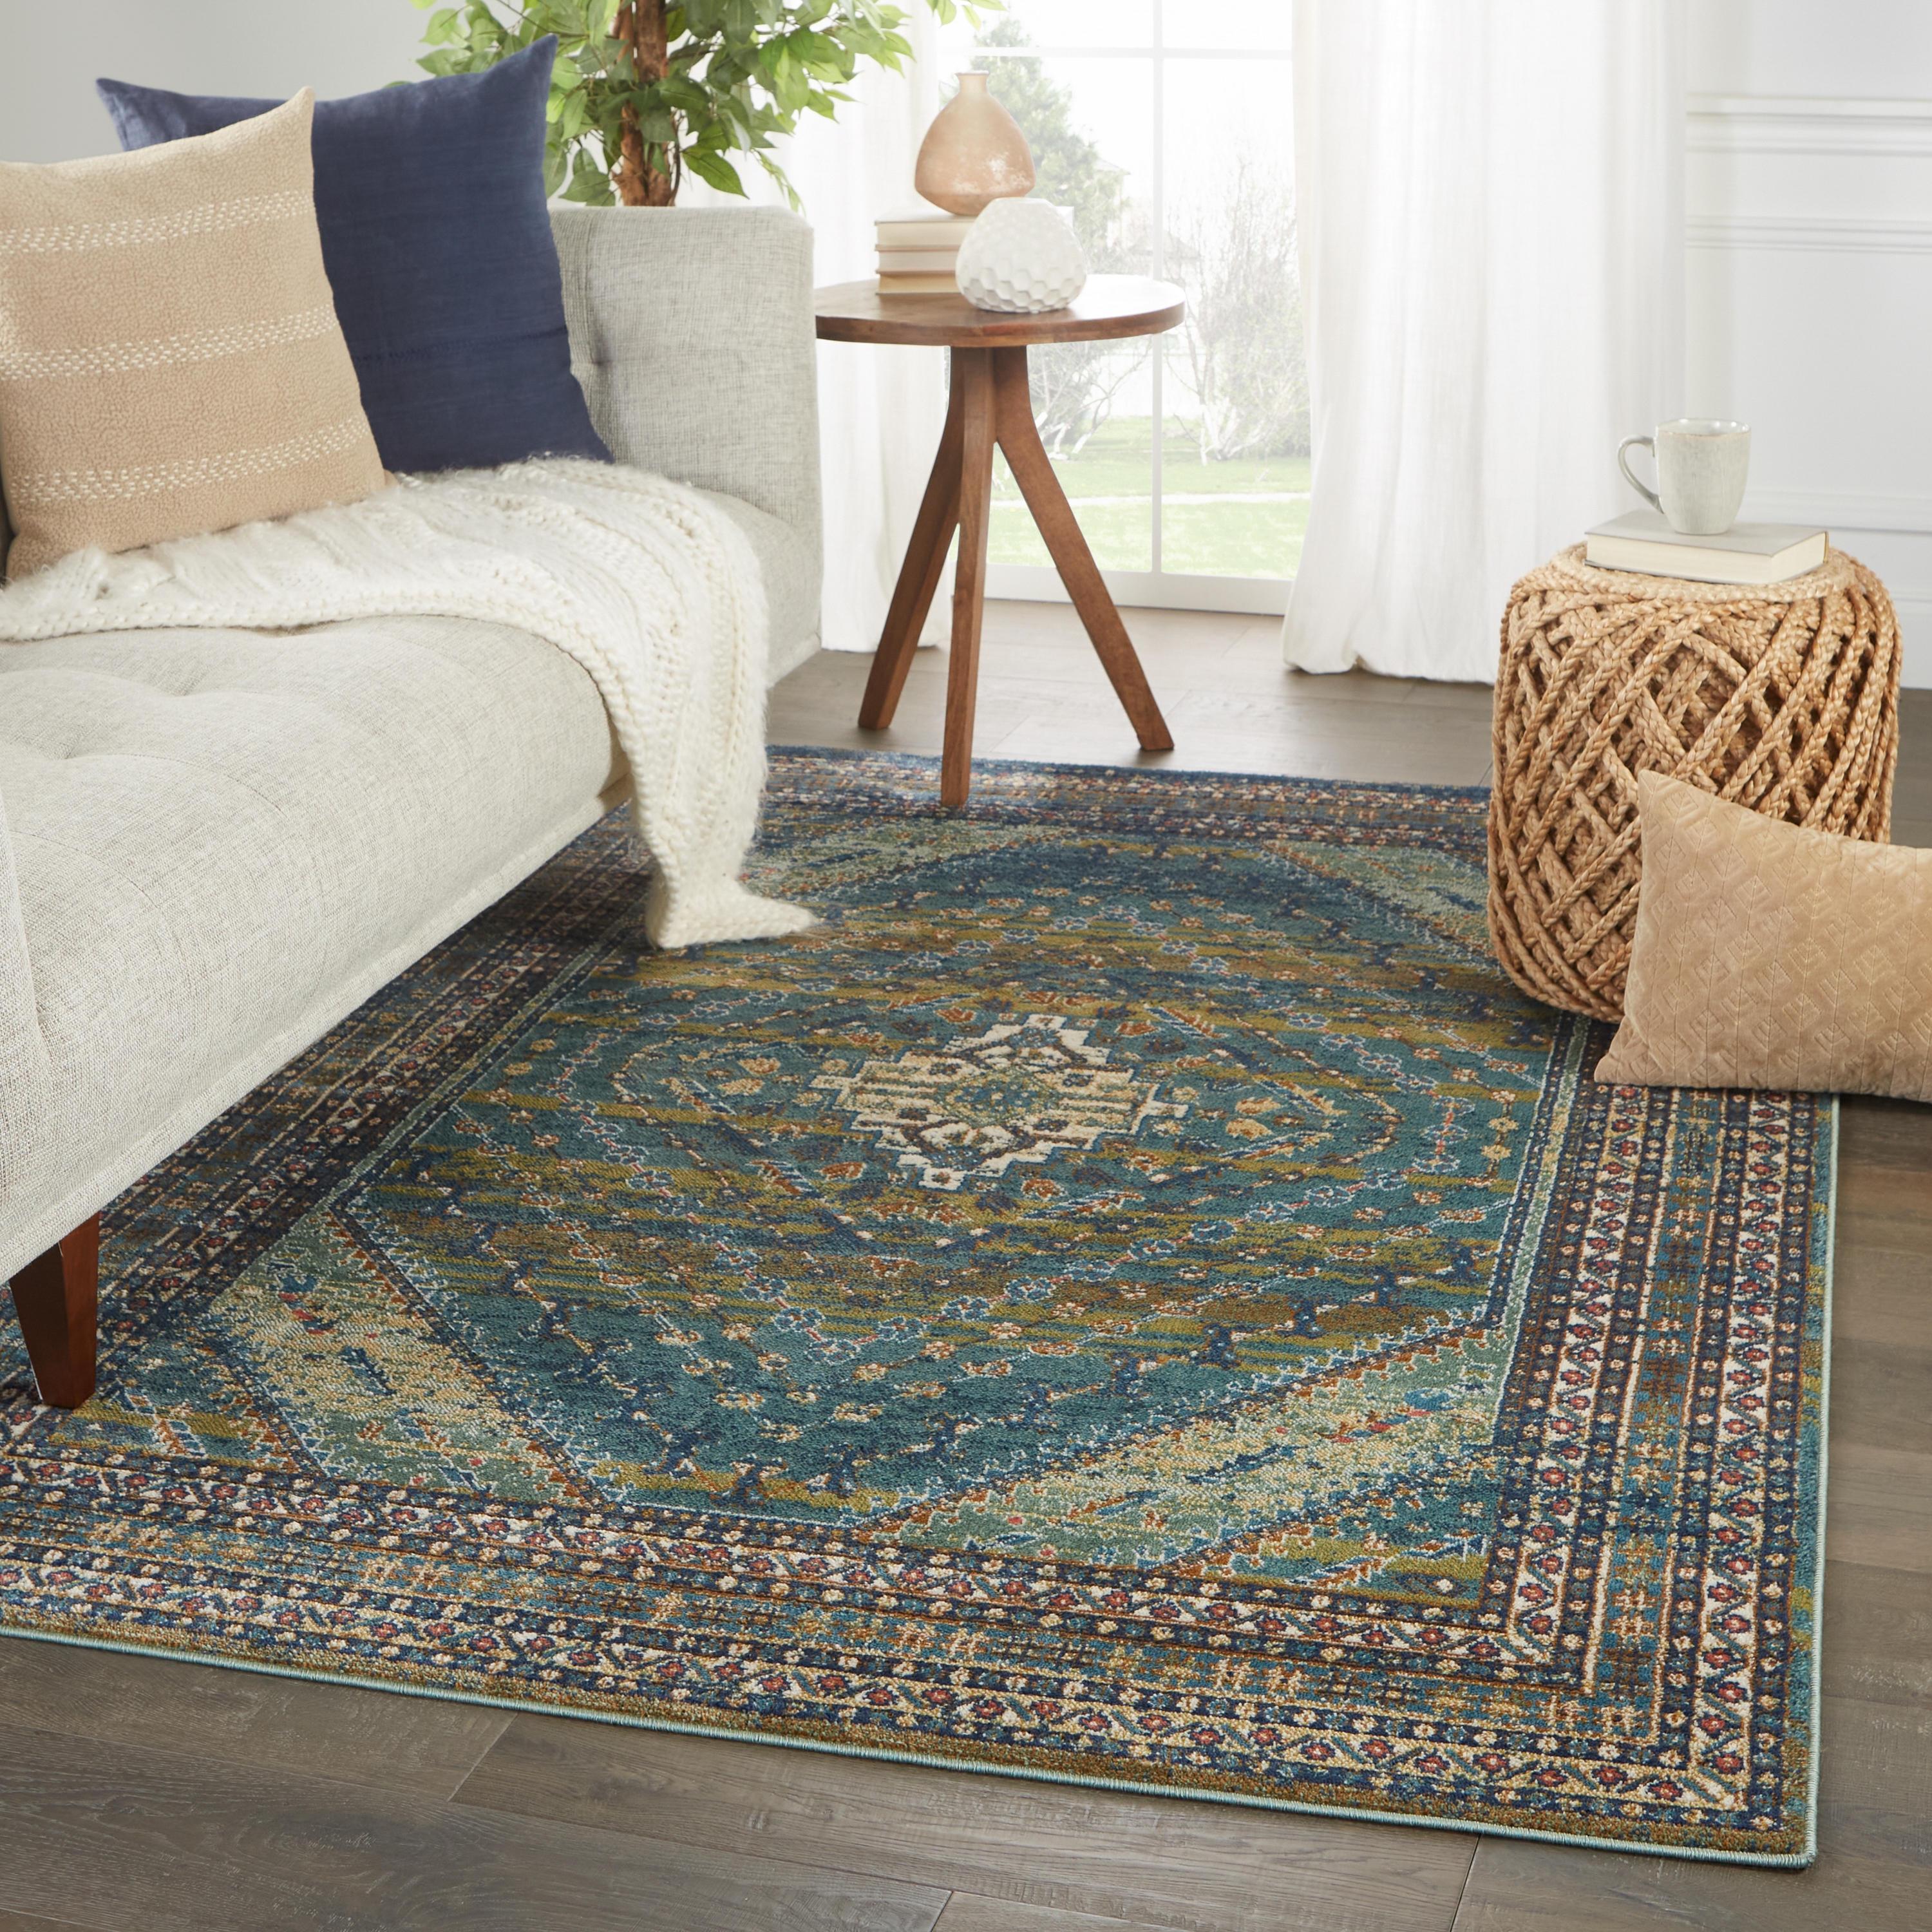 Vibe By Selah Medallion Blue/ Green Area Rug (7'6"X9'6") - Image 4